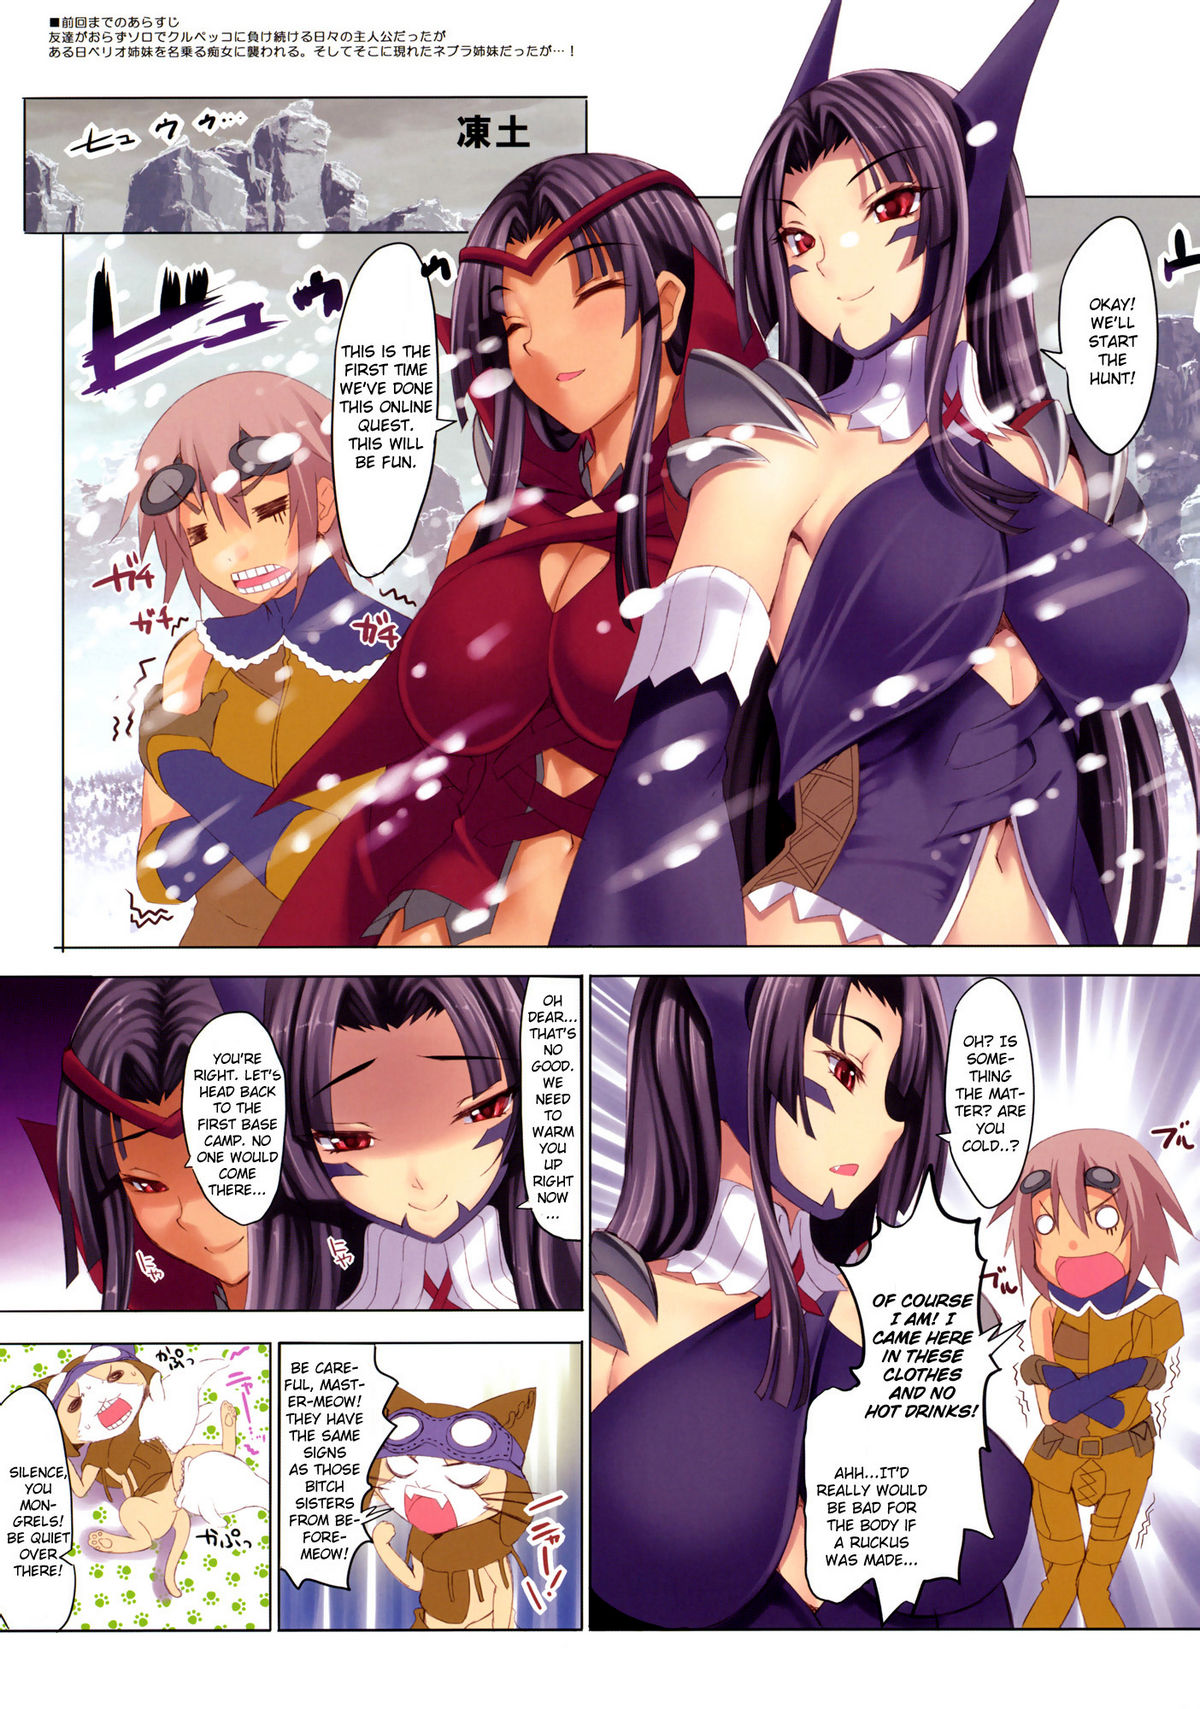 (C80) [Clesta (Cle Masahiro)] CL-orz 17 (Monster Hunter) [English] [CGrascal] [Decensored] page 3 full